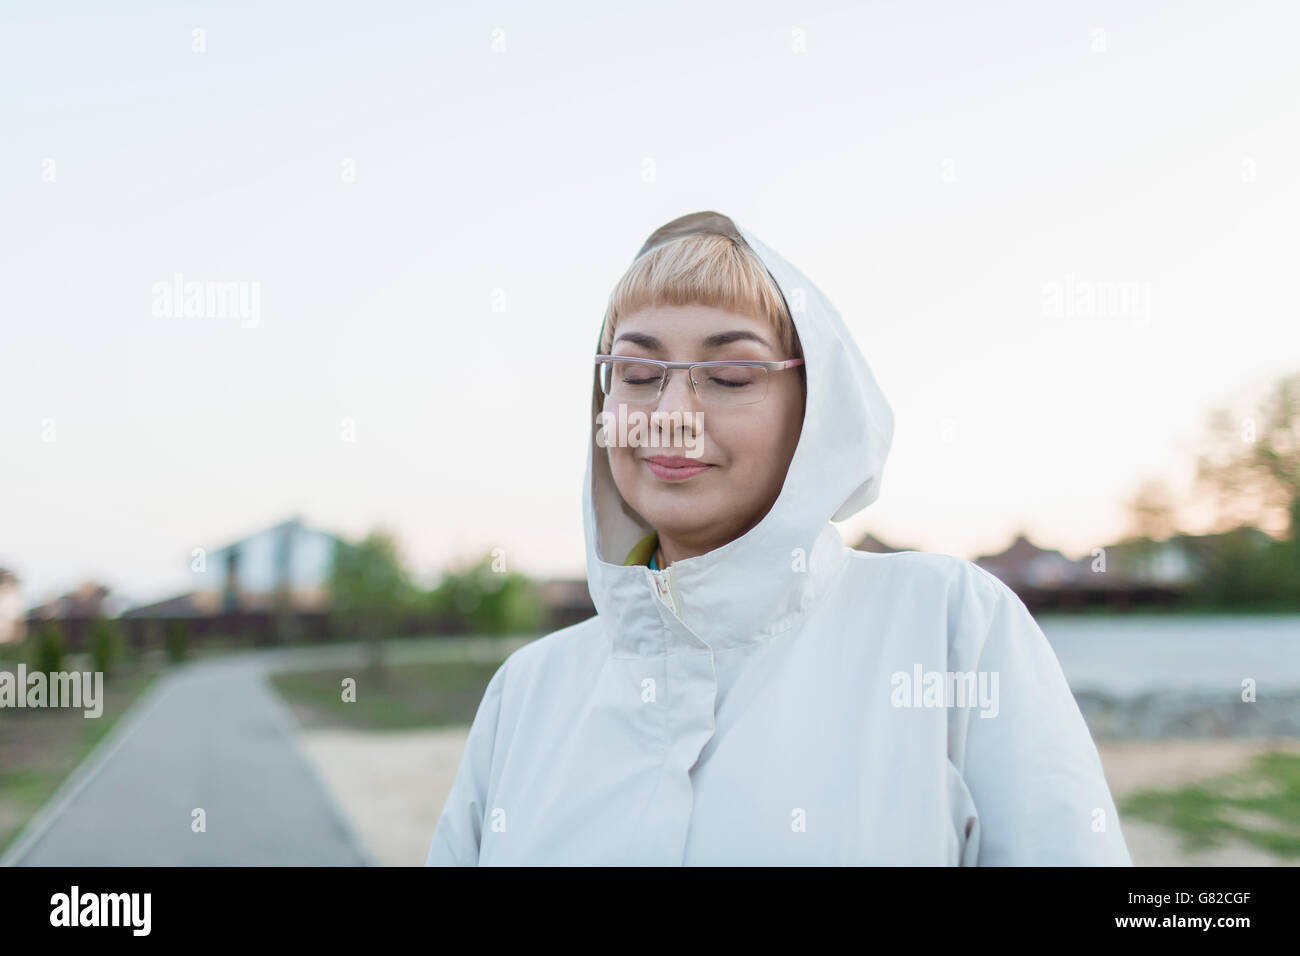 Smiling woman with closed eyes wearing hood in park against clear sky Stock Photo